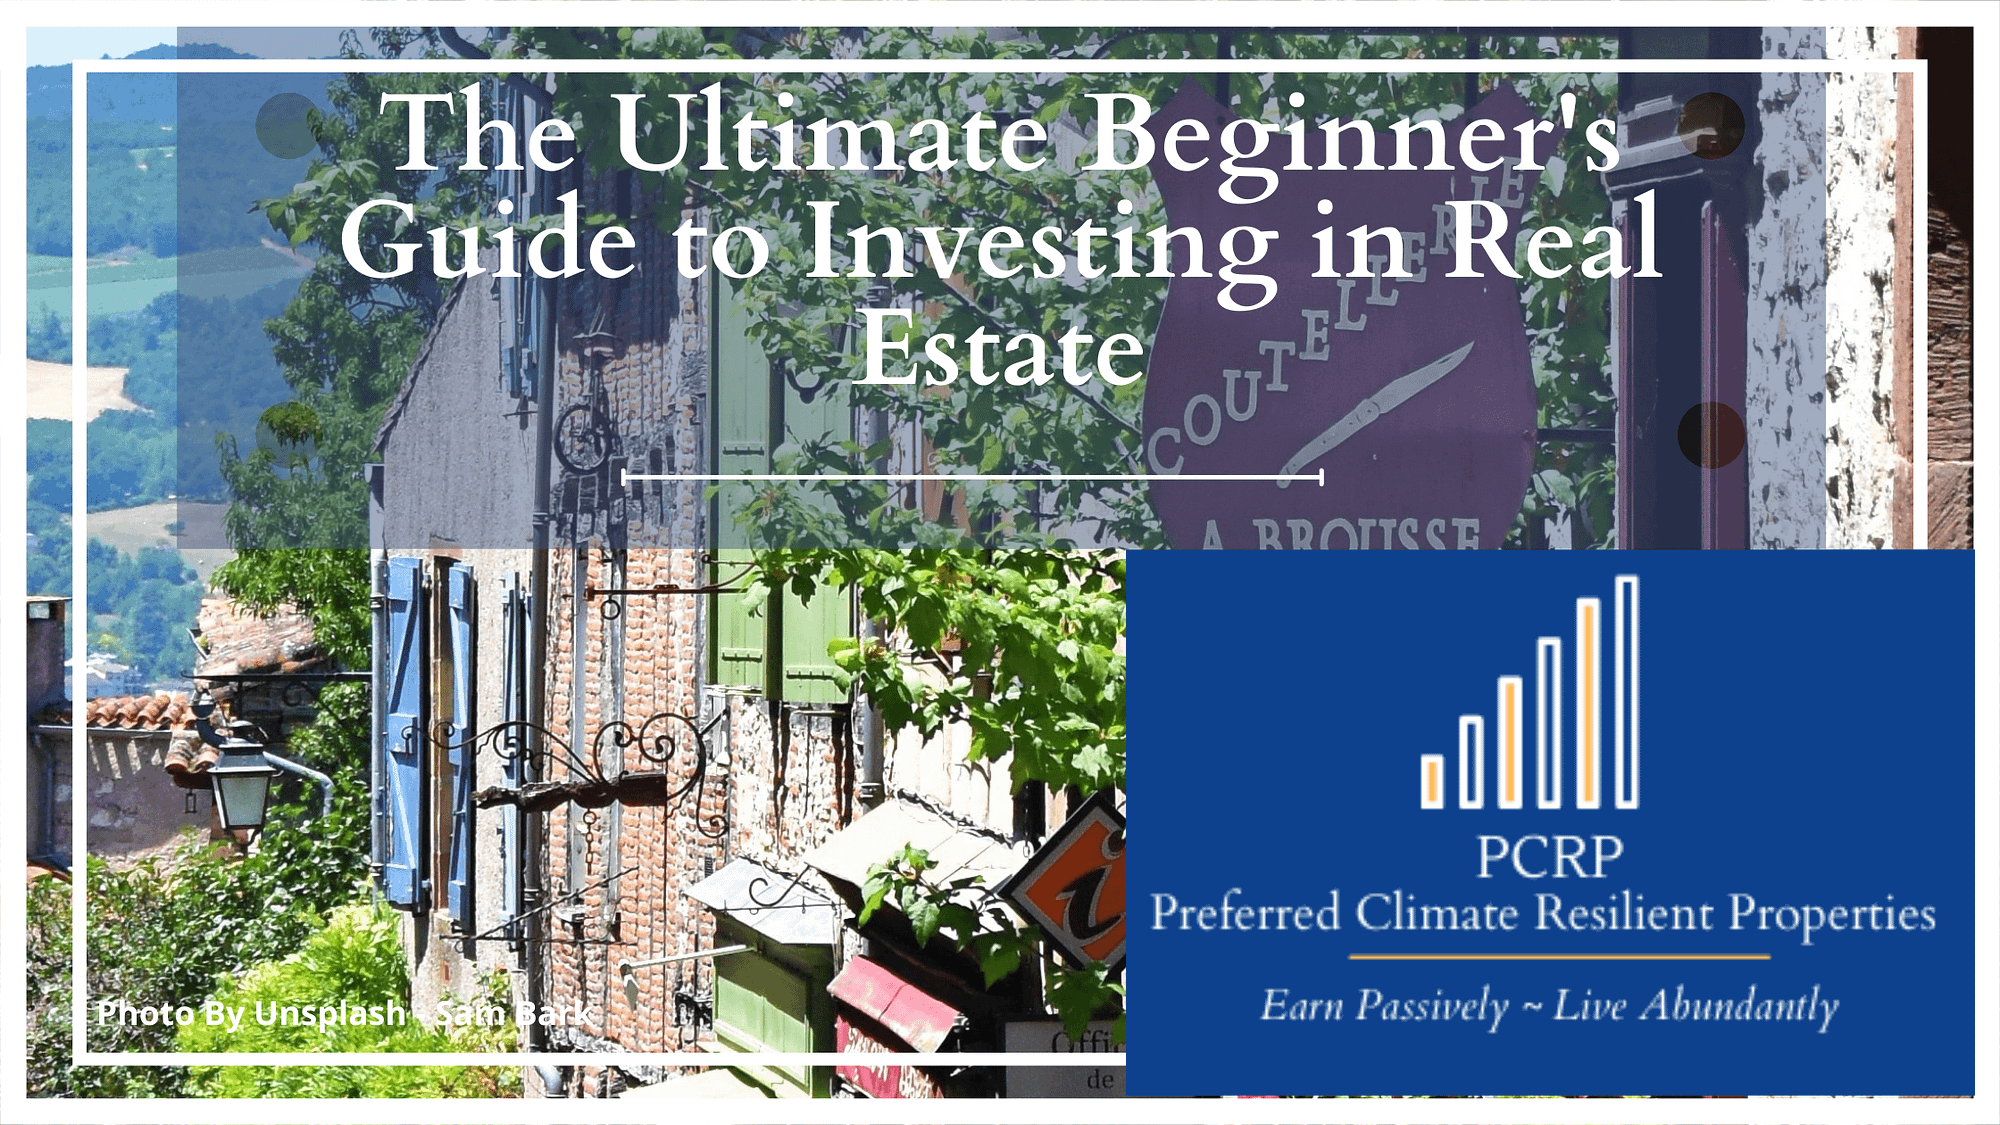 The Ultimate Beginner's Guide to Investing - Picture of European town